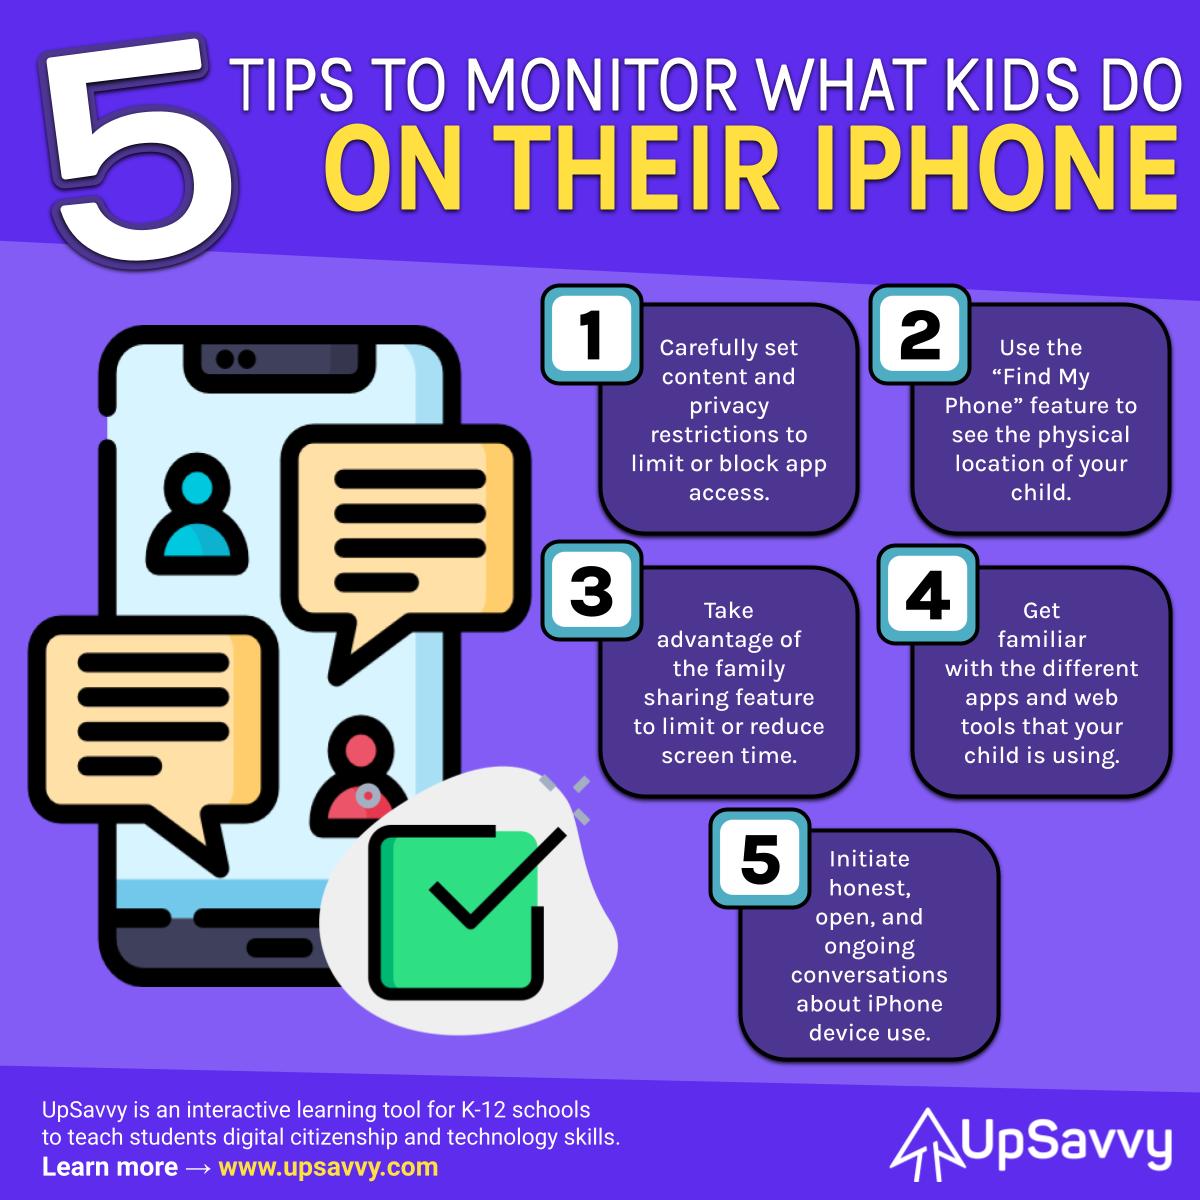 5 Tips to Monitor iPhone Use